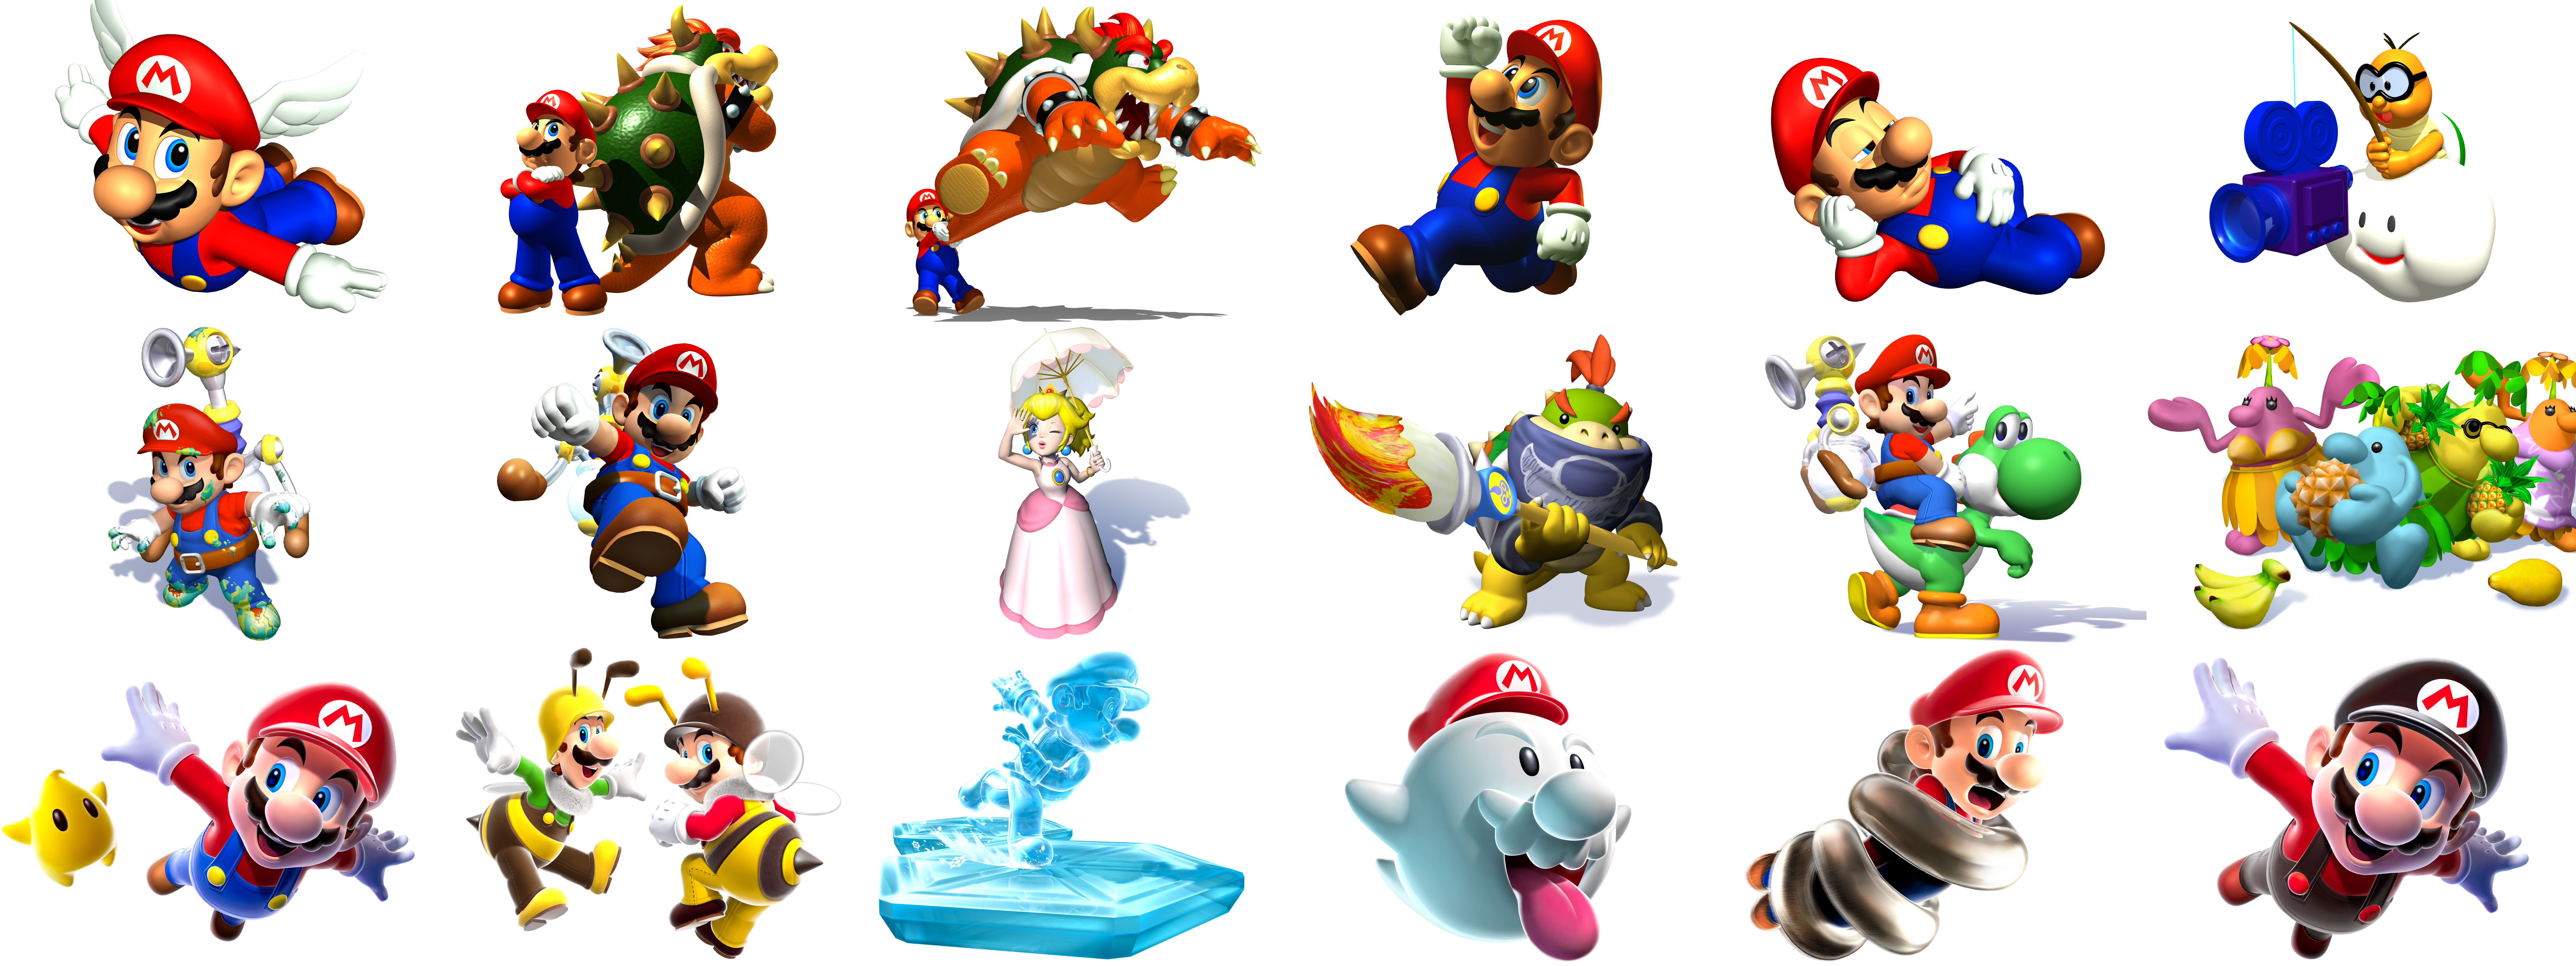 Super Mario 3D All-Stars - Loading Backgrounds